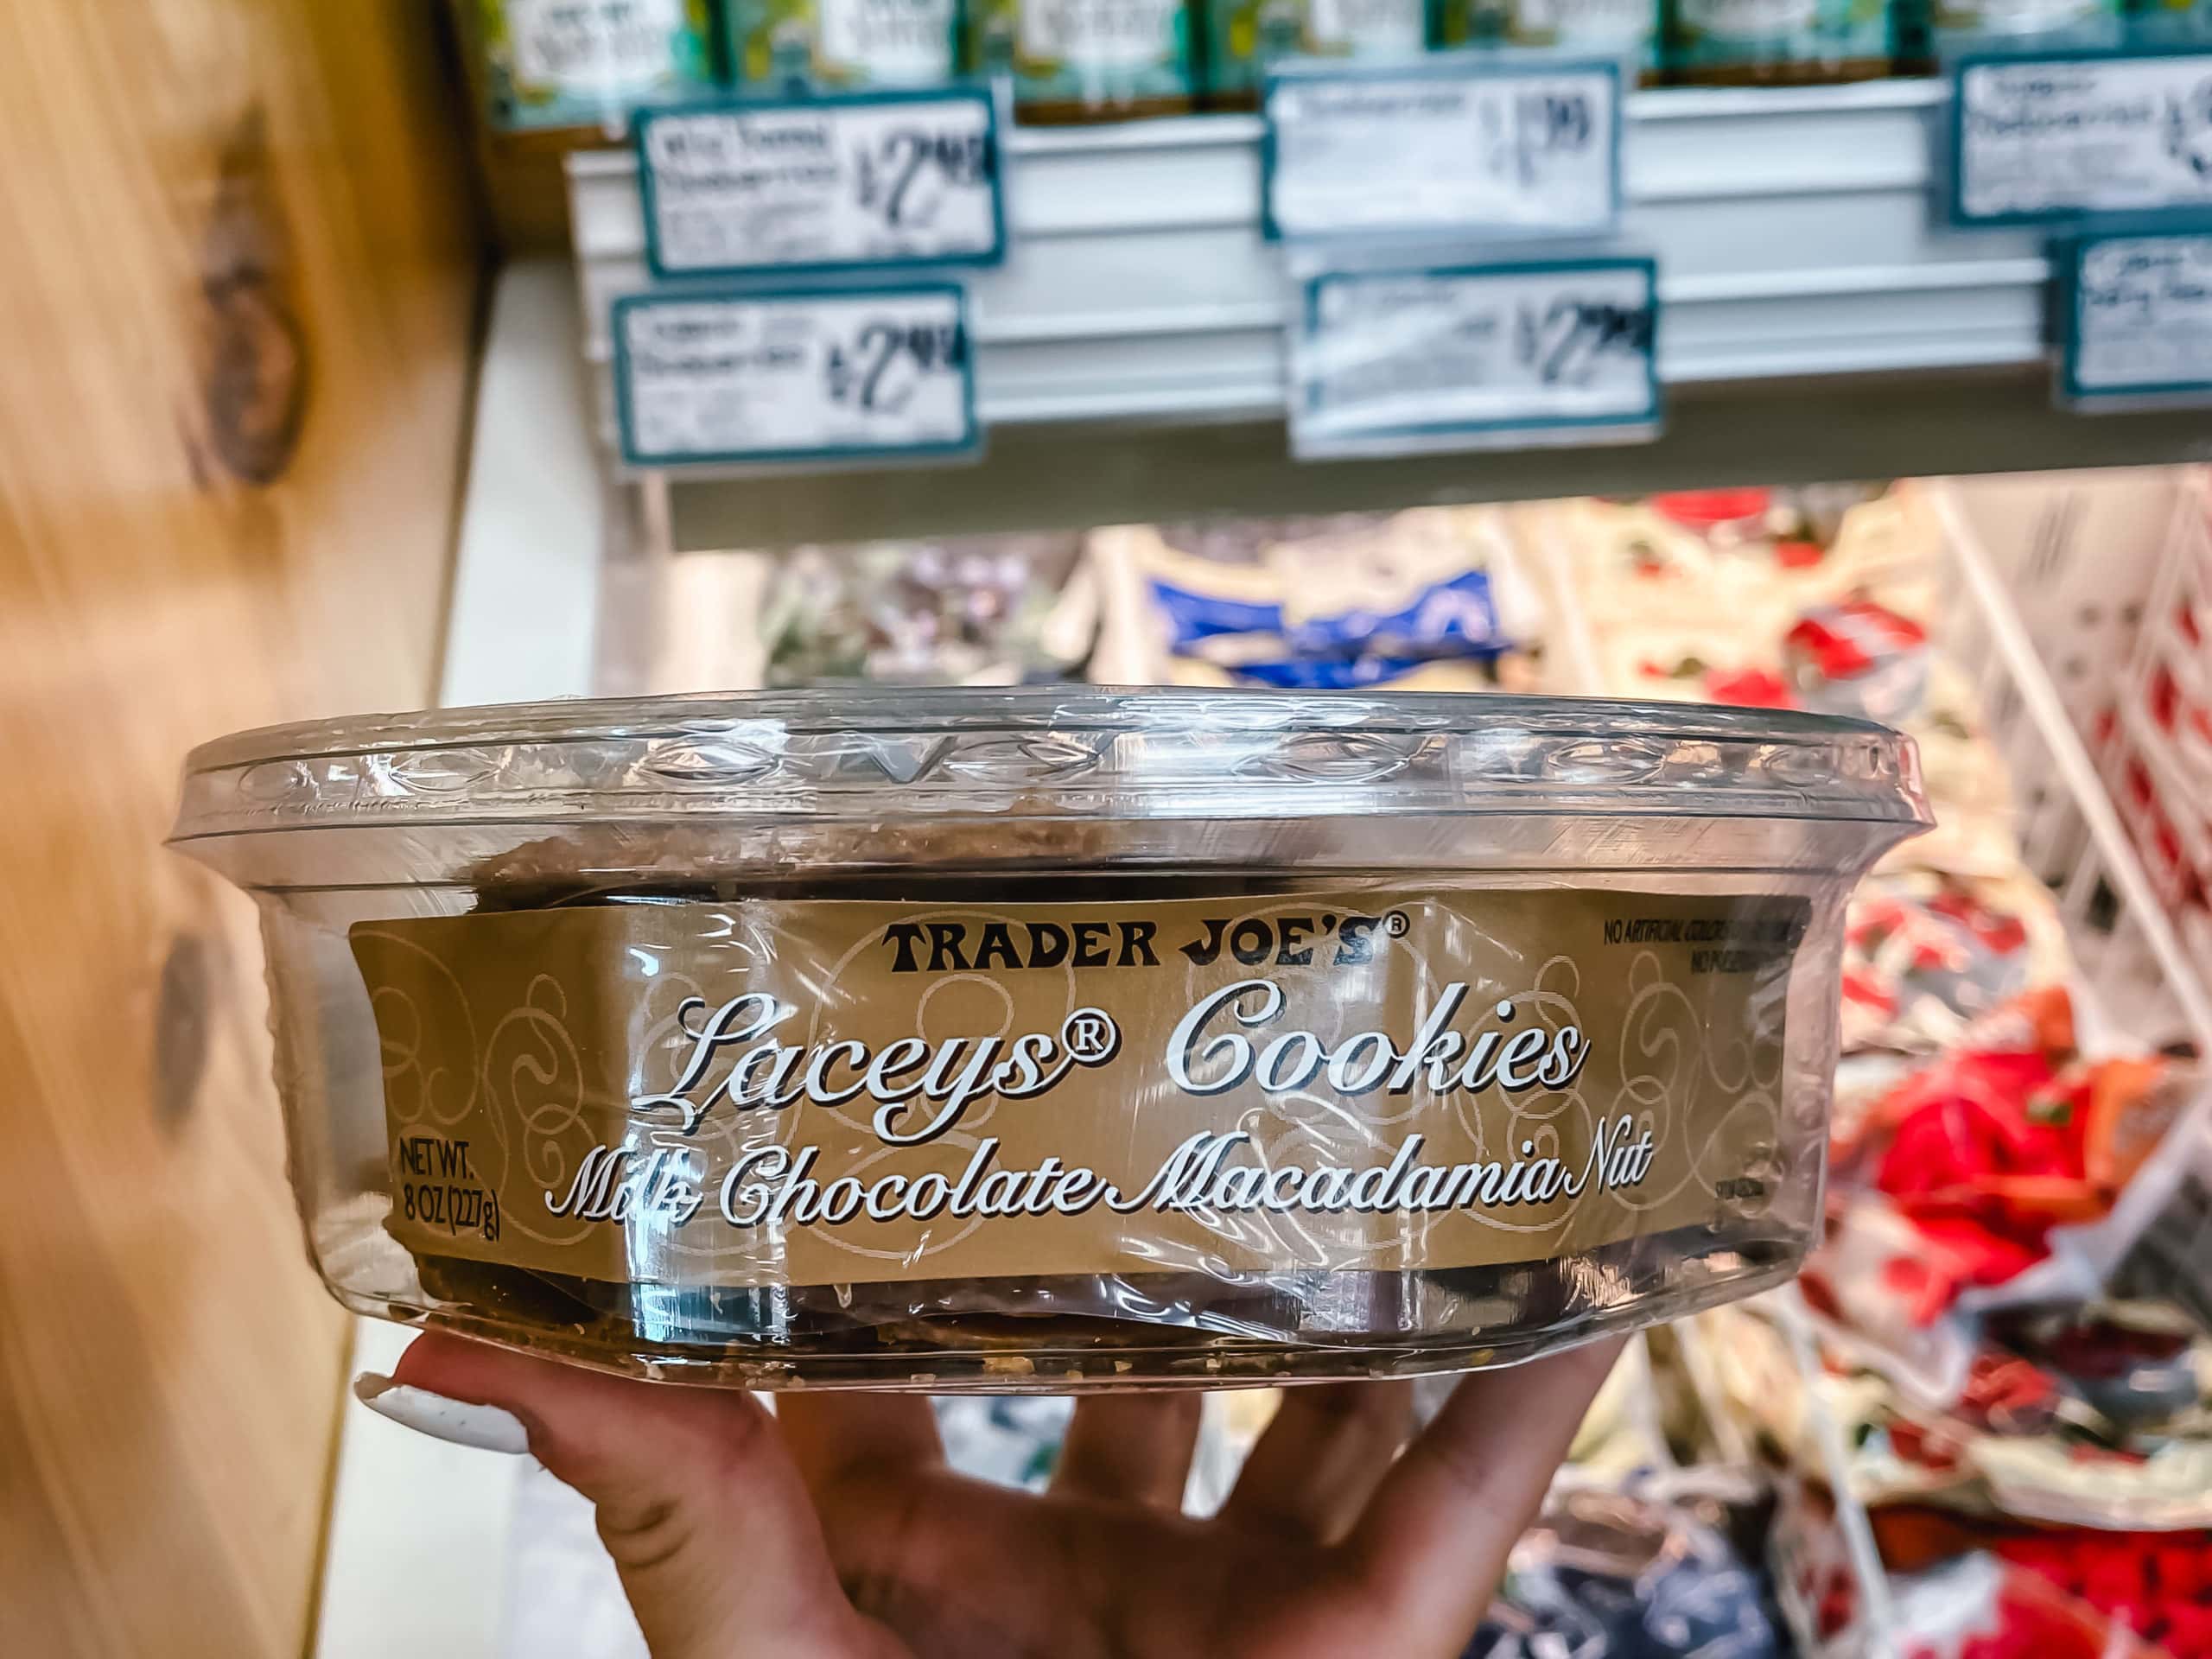 Milk Chocolate Macadamia Nut Chocolate Lace Cookies. The Best Foods to Buy at Trader Joe's. 